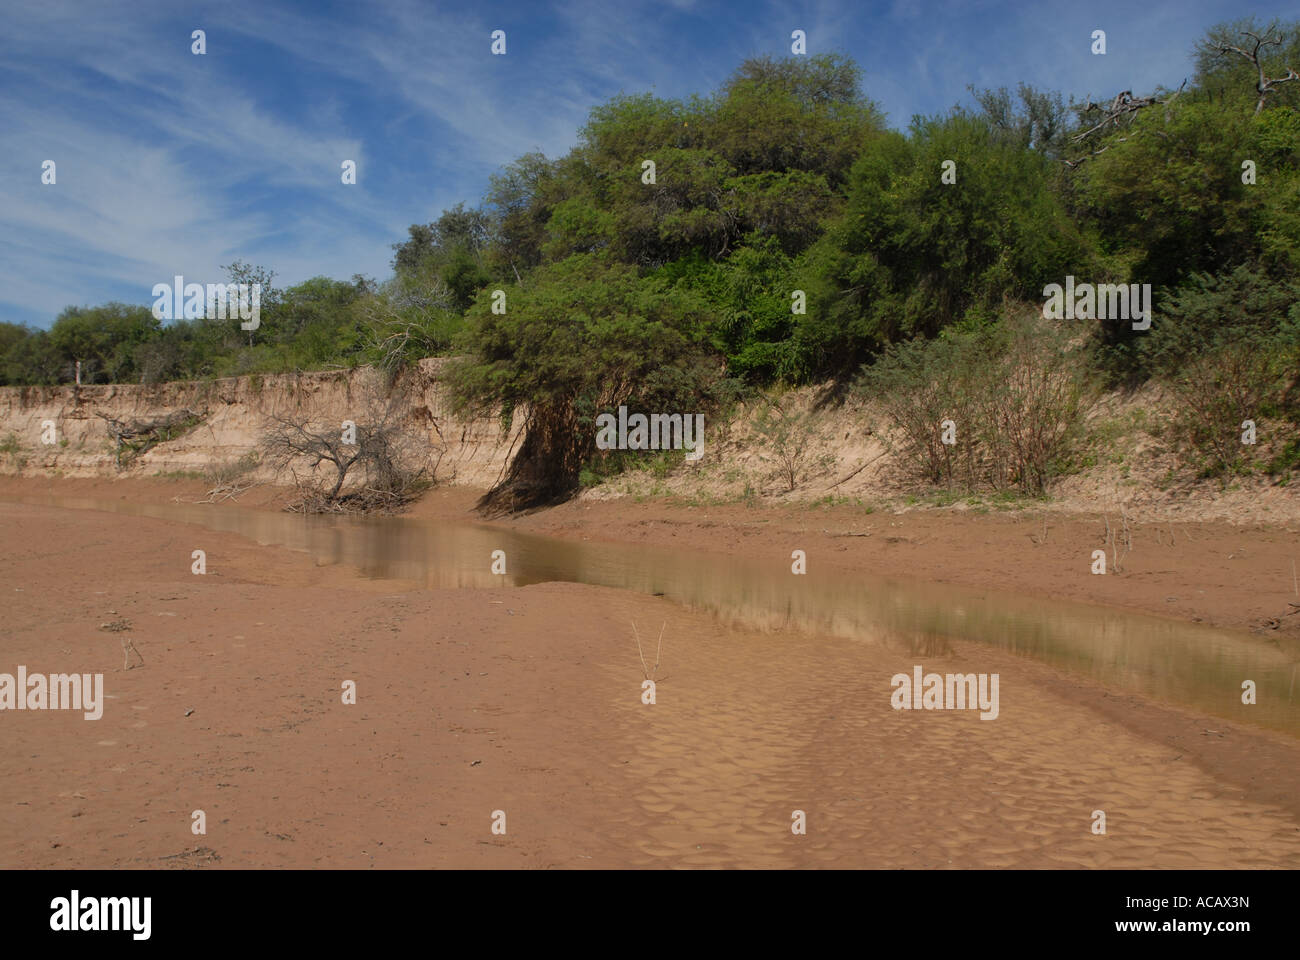 Dry time at Rio Pilcomayo, the river is shrunken to a stream, Gran Chaco, Paraguay Stock Photo